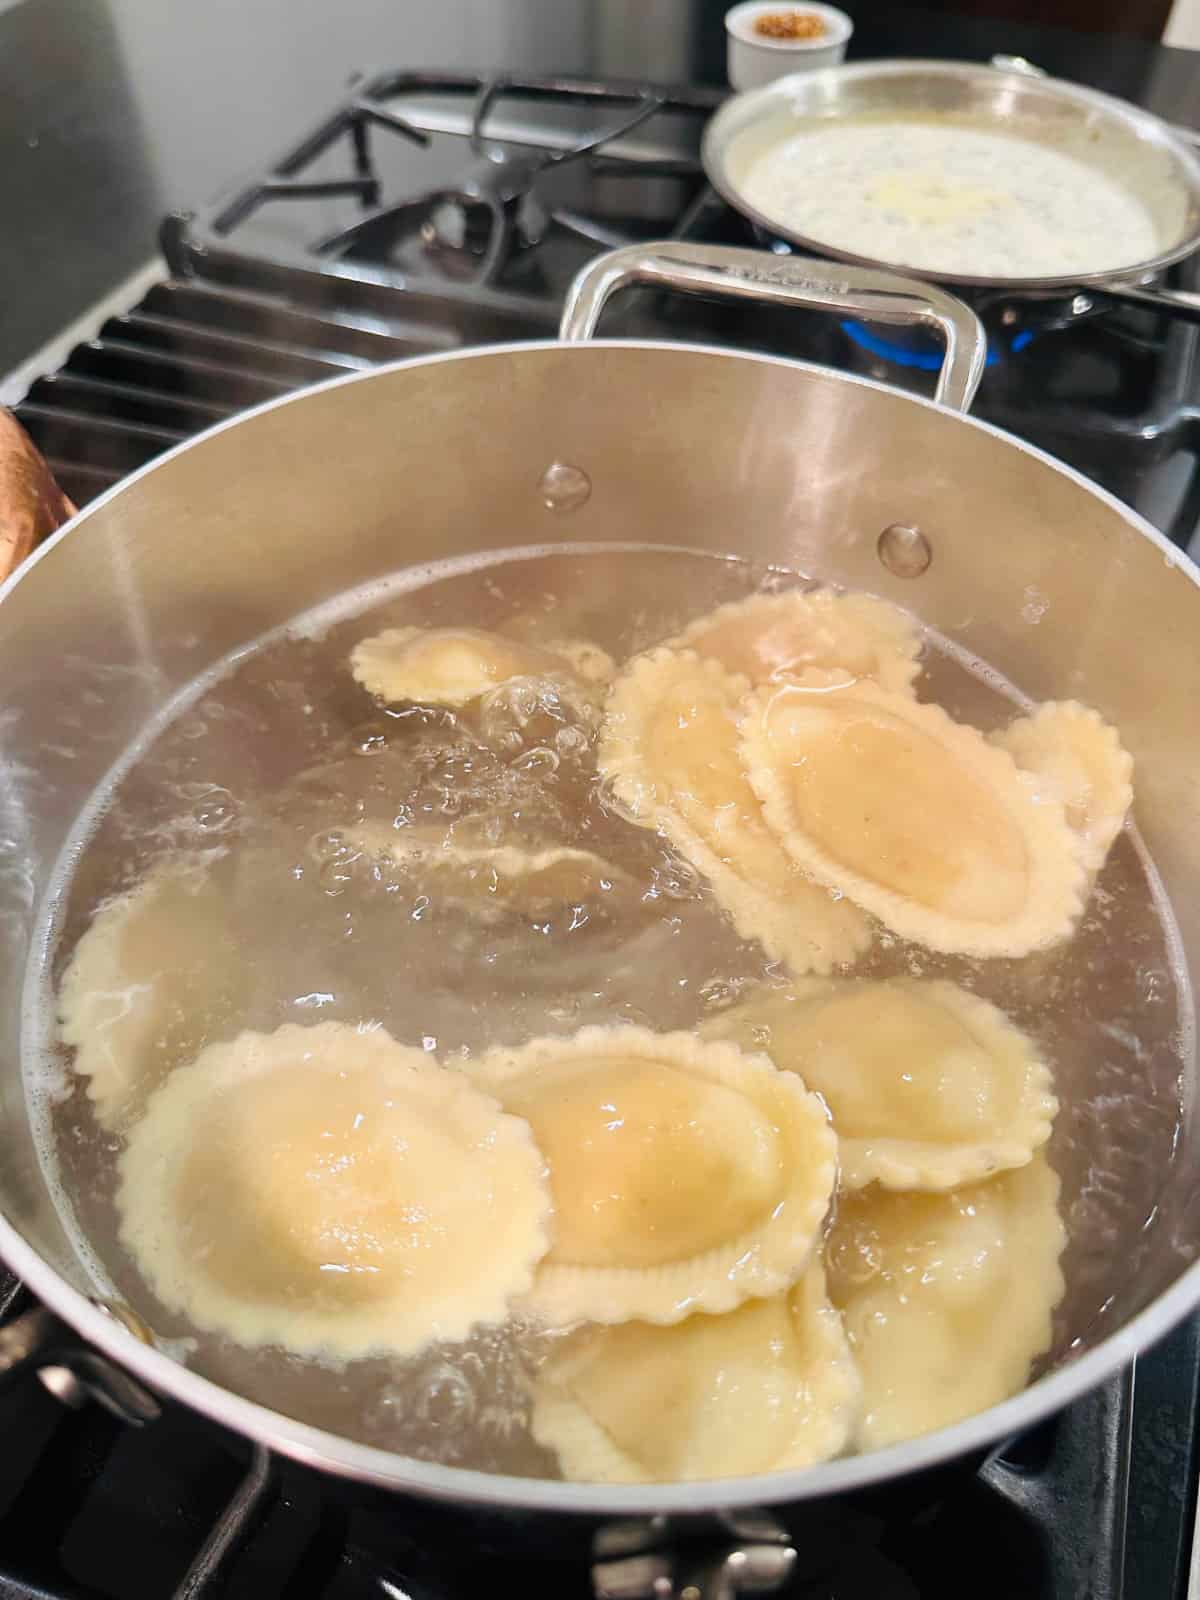 Ravioli cooking in a steel pot of boiling water.